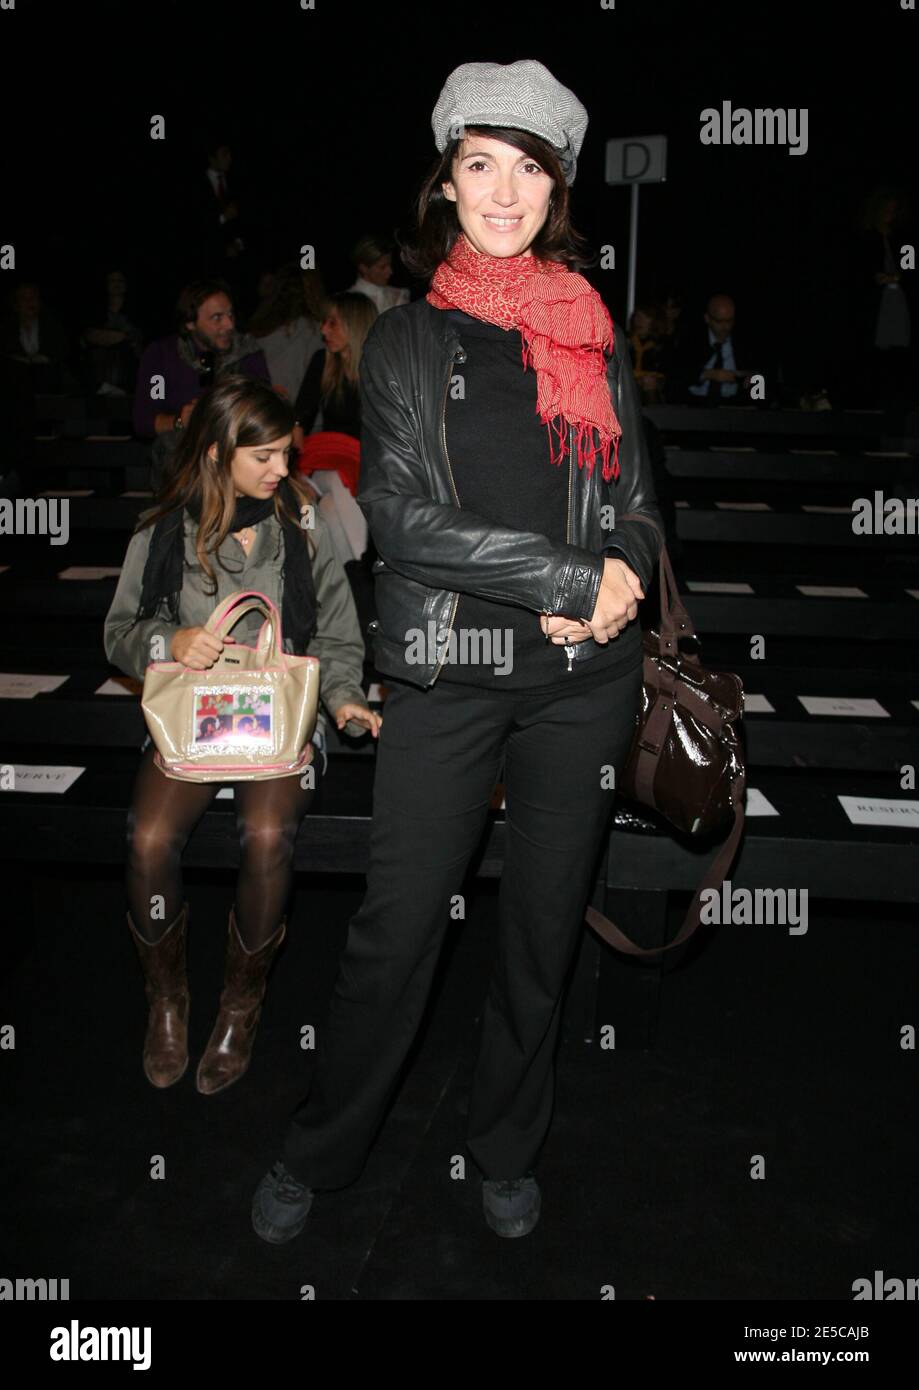 Actress Zabou Breitman attending the Paul and Joe Spring Summer 2009 Ready-to-Wear collection show in Paris, France on October 4, 2008. Photo by Denis Guignebourg/ABACAPRESS.COM Stock Photo